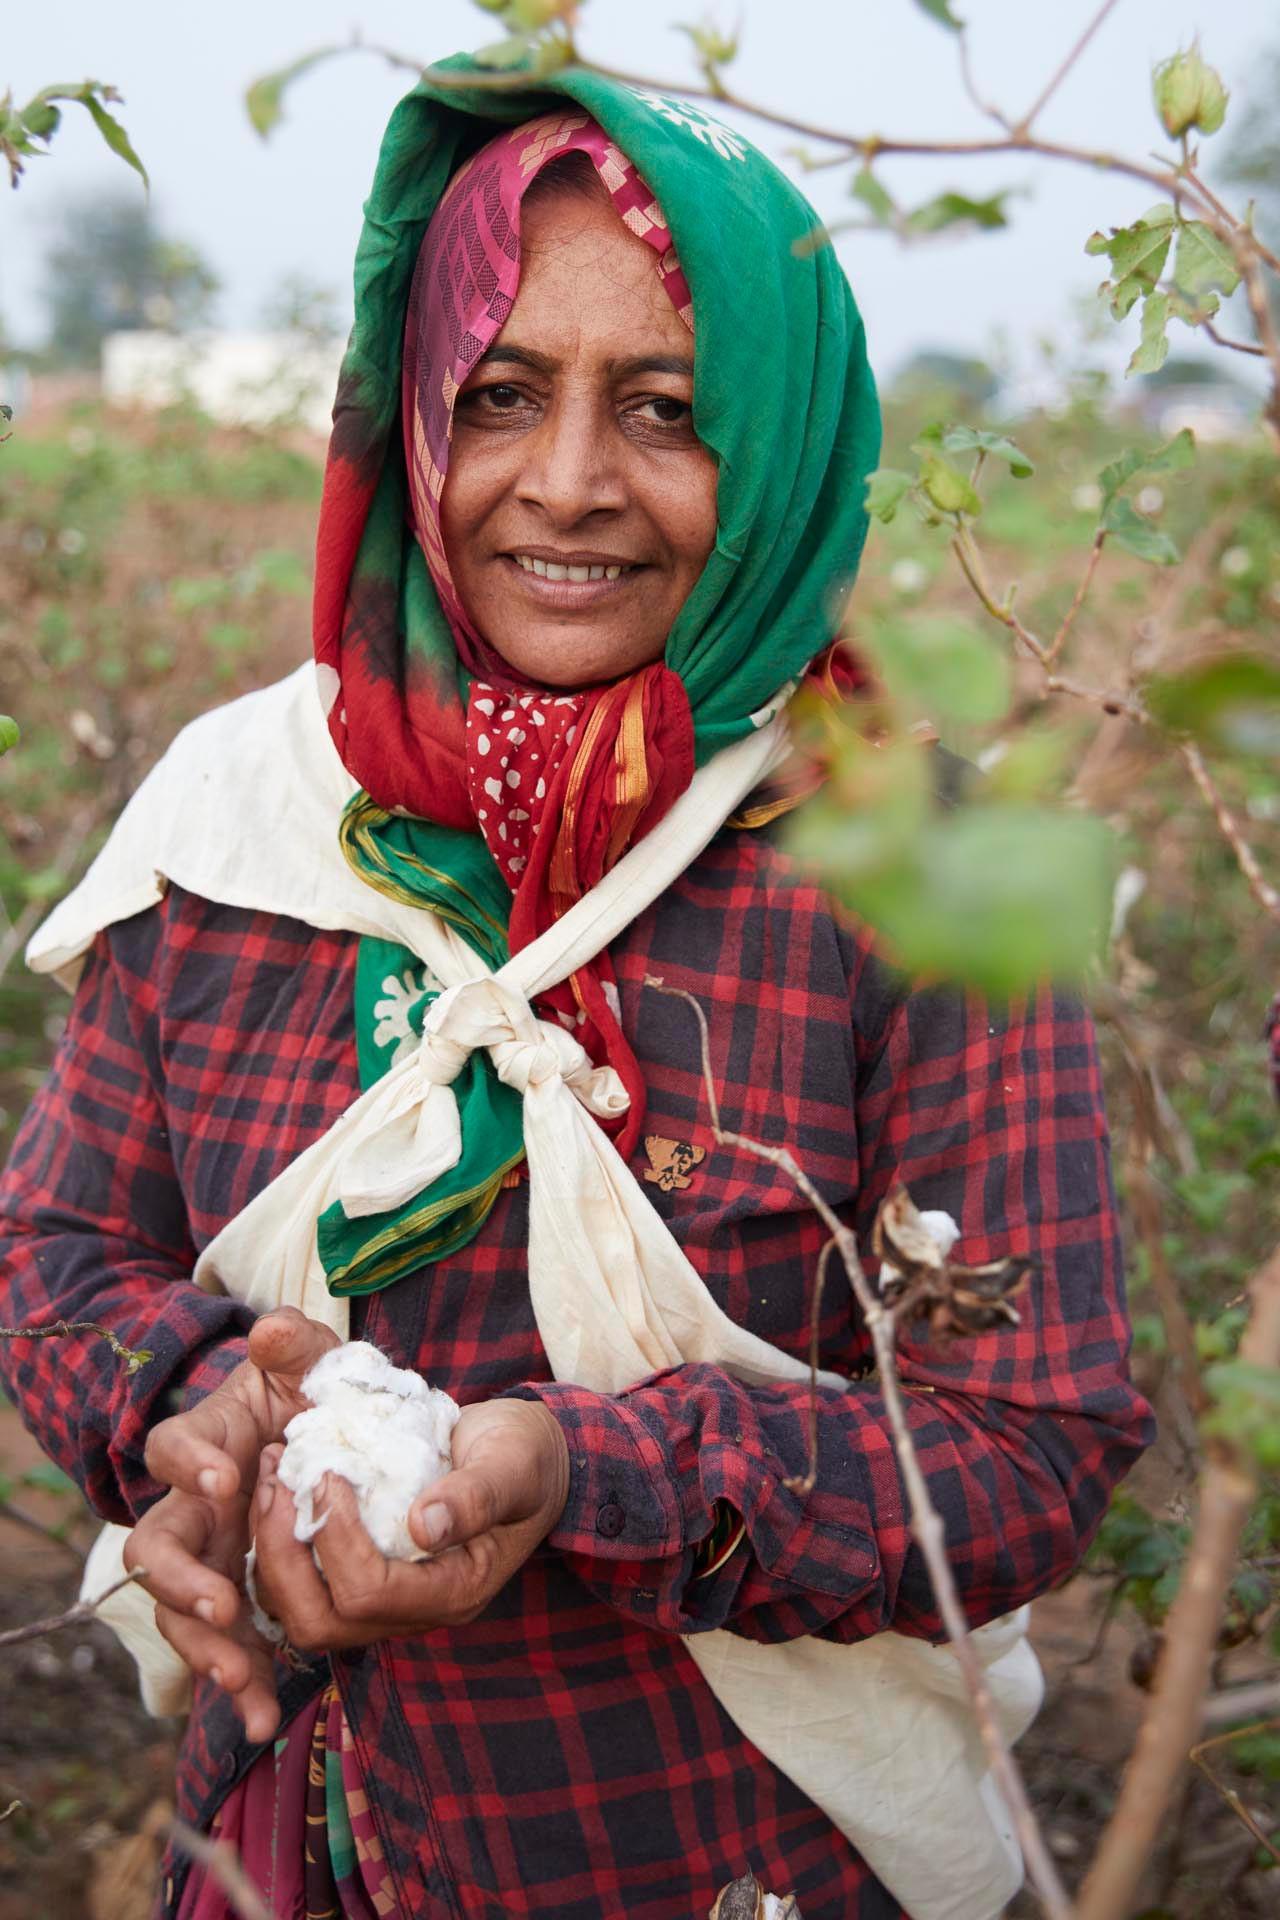 At Primark we are committed to supporting the livelihoods of the people who make our clothes.